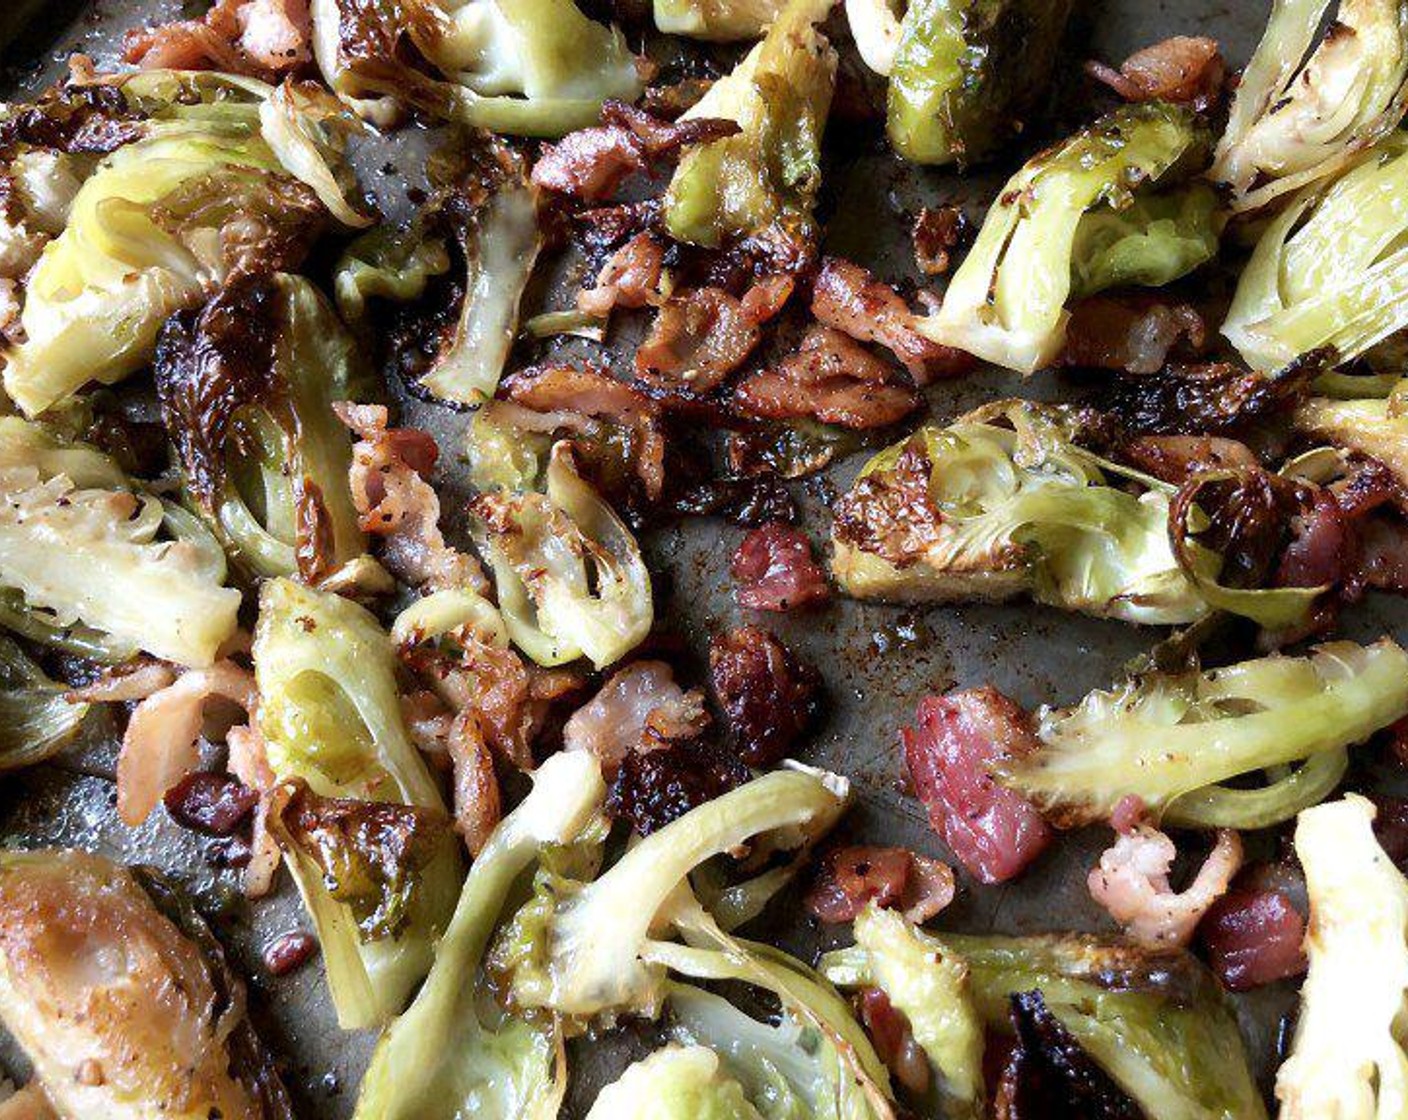 step 5 Roast the brussels sprouts for 25 to 30 minutes, until they’re tender and nicely browned and the bacon is cooked. Toss once during roasting.